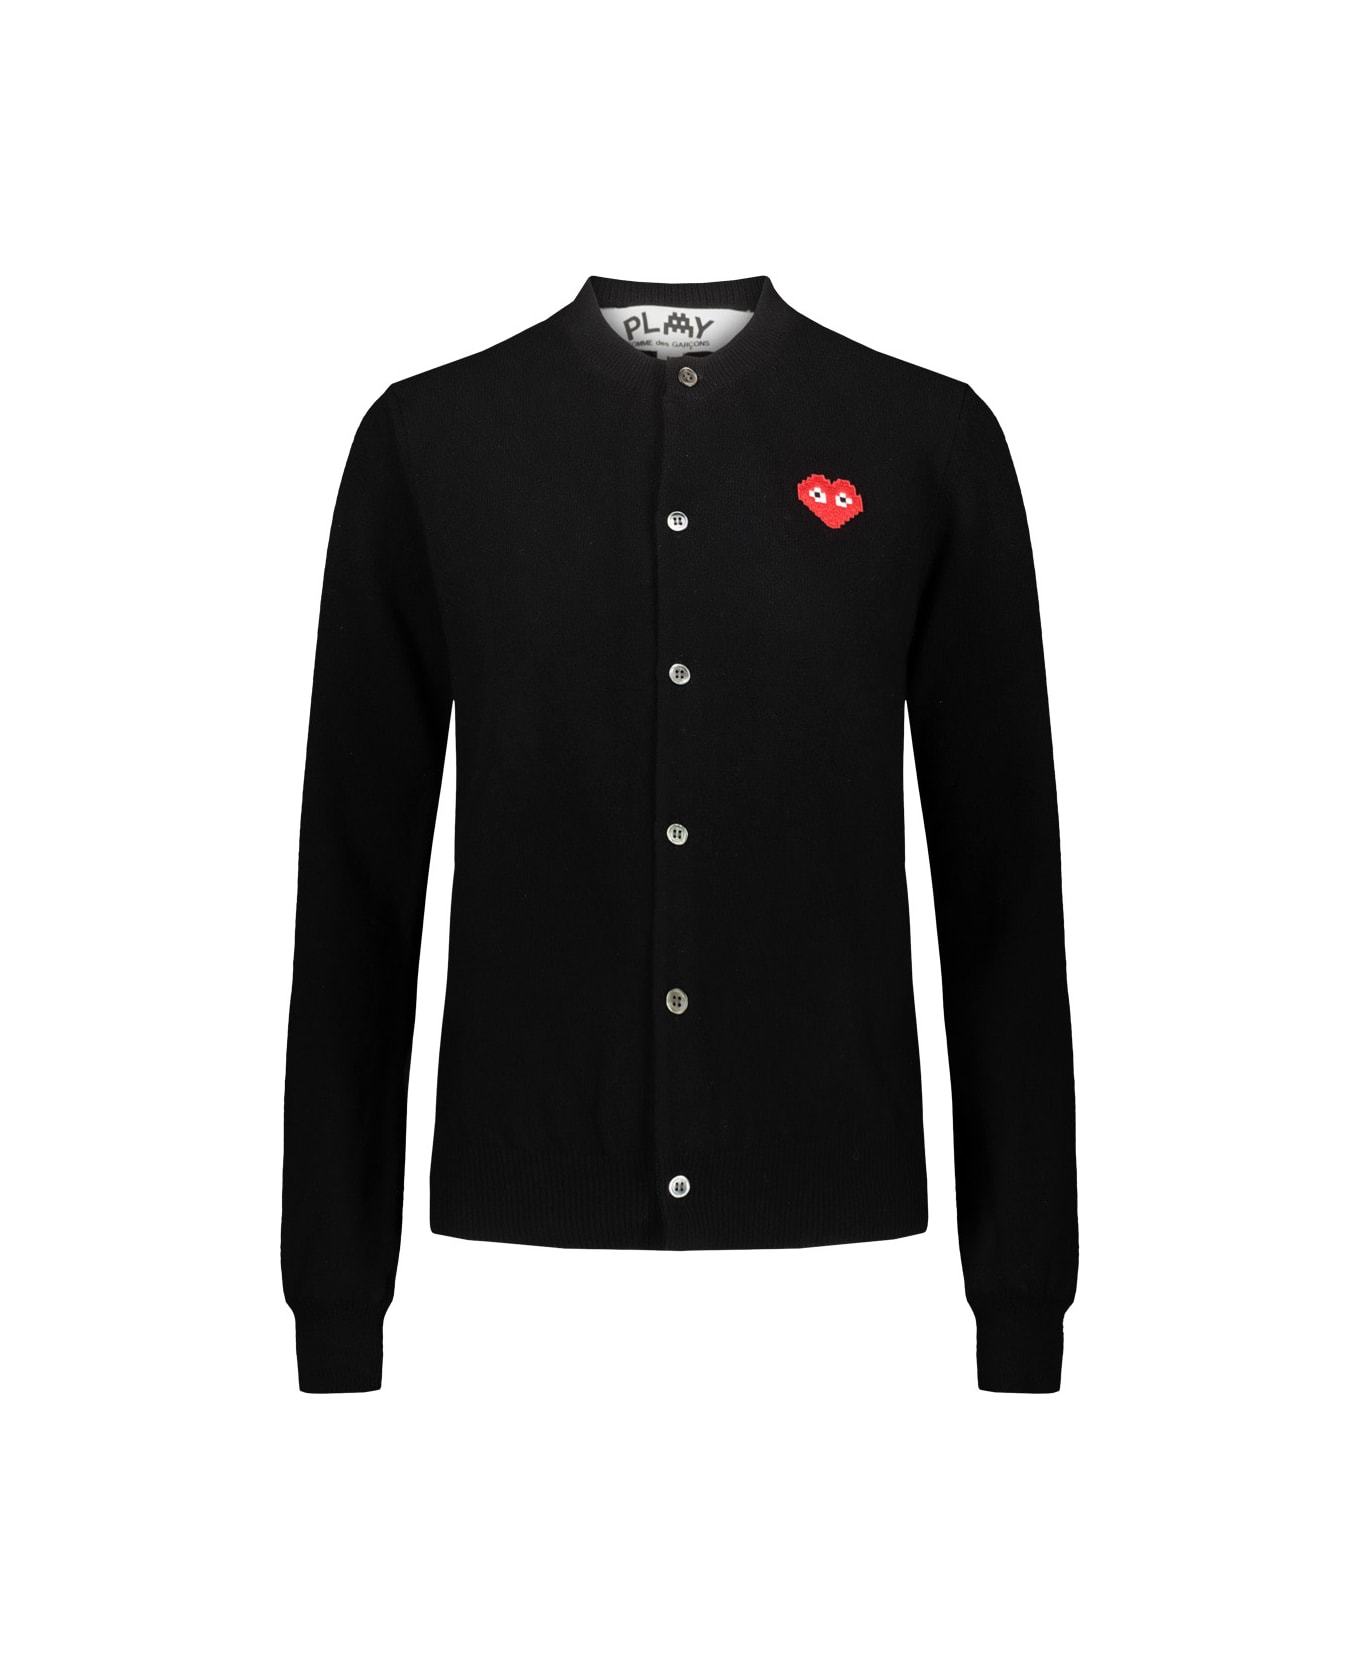 Comme des Garçons Play Black Cardigan With Red Pixelated Heart - Blk カーディガン